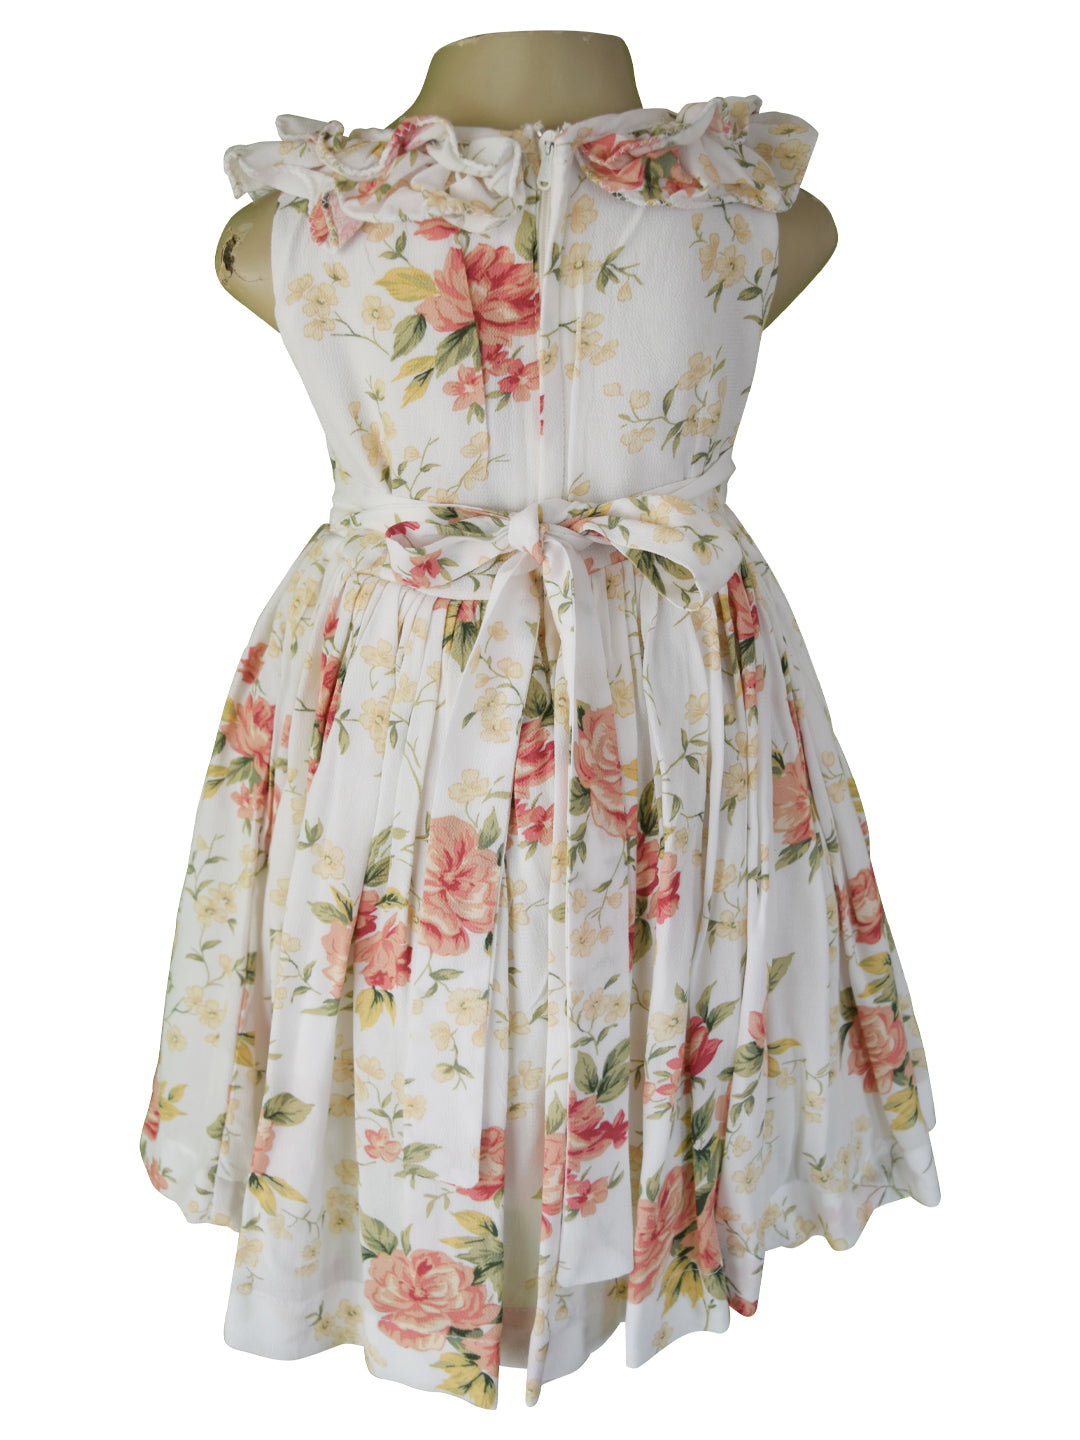 Floral Ruffle Dress for girls